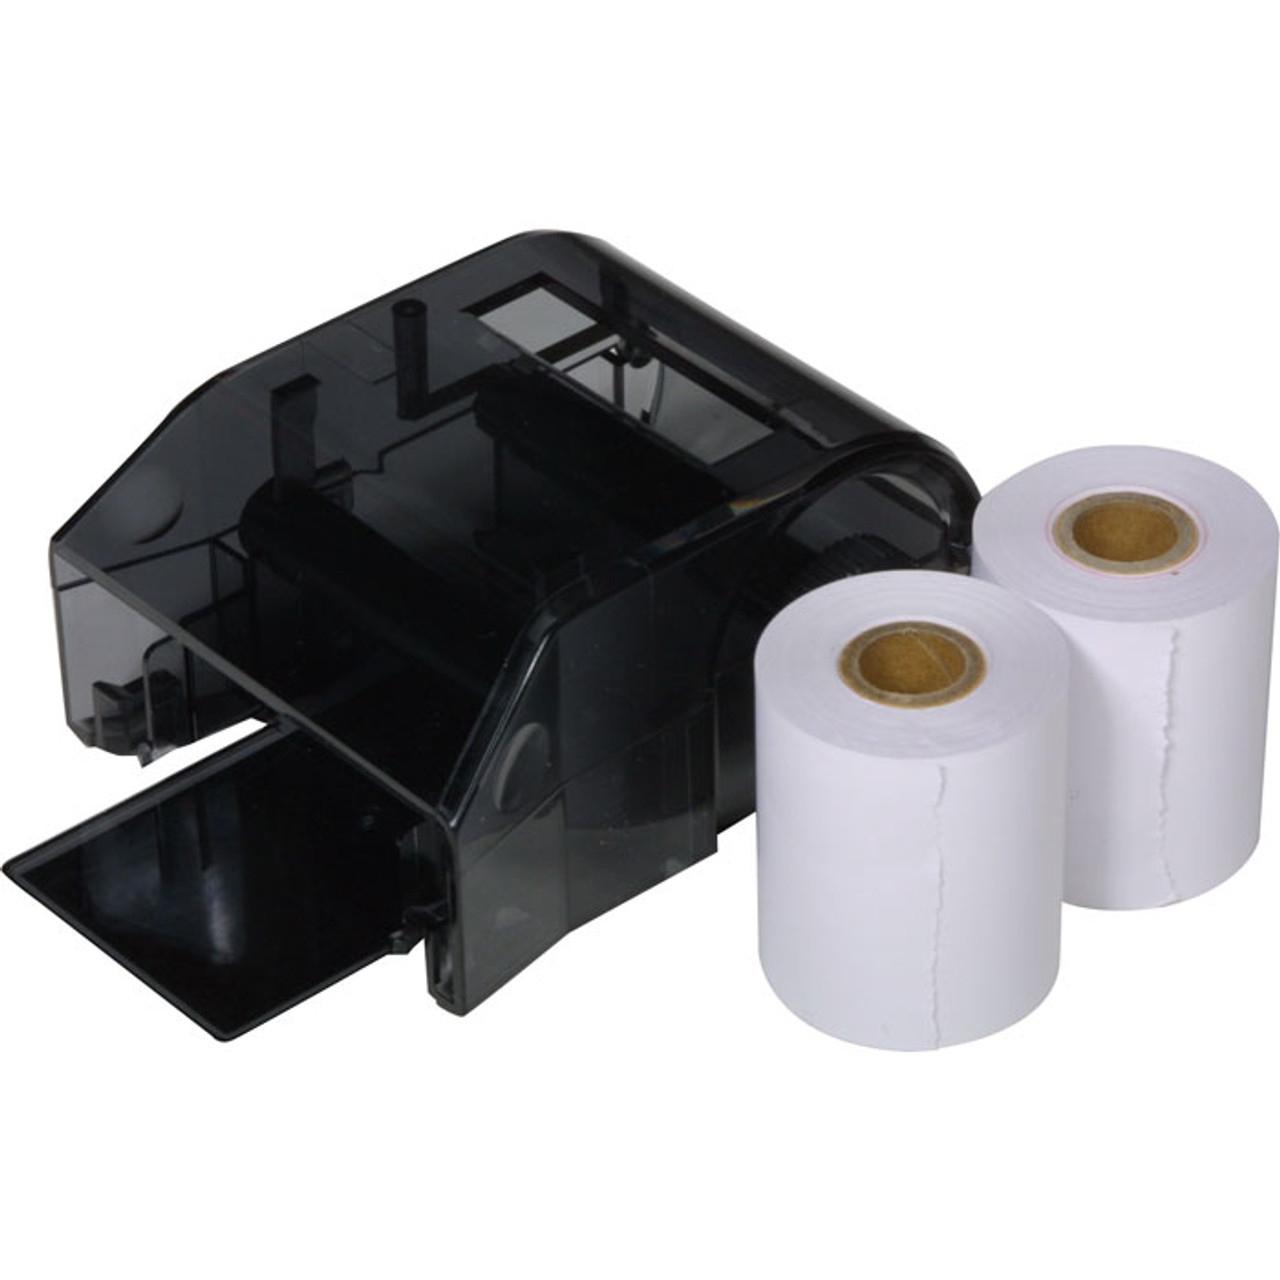 Buy Seiko Large Paper Roll Holder Online 